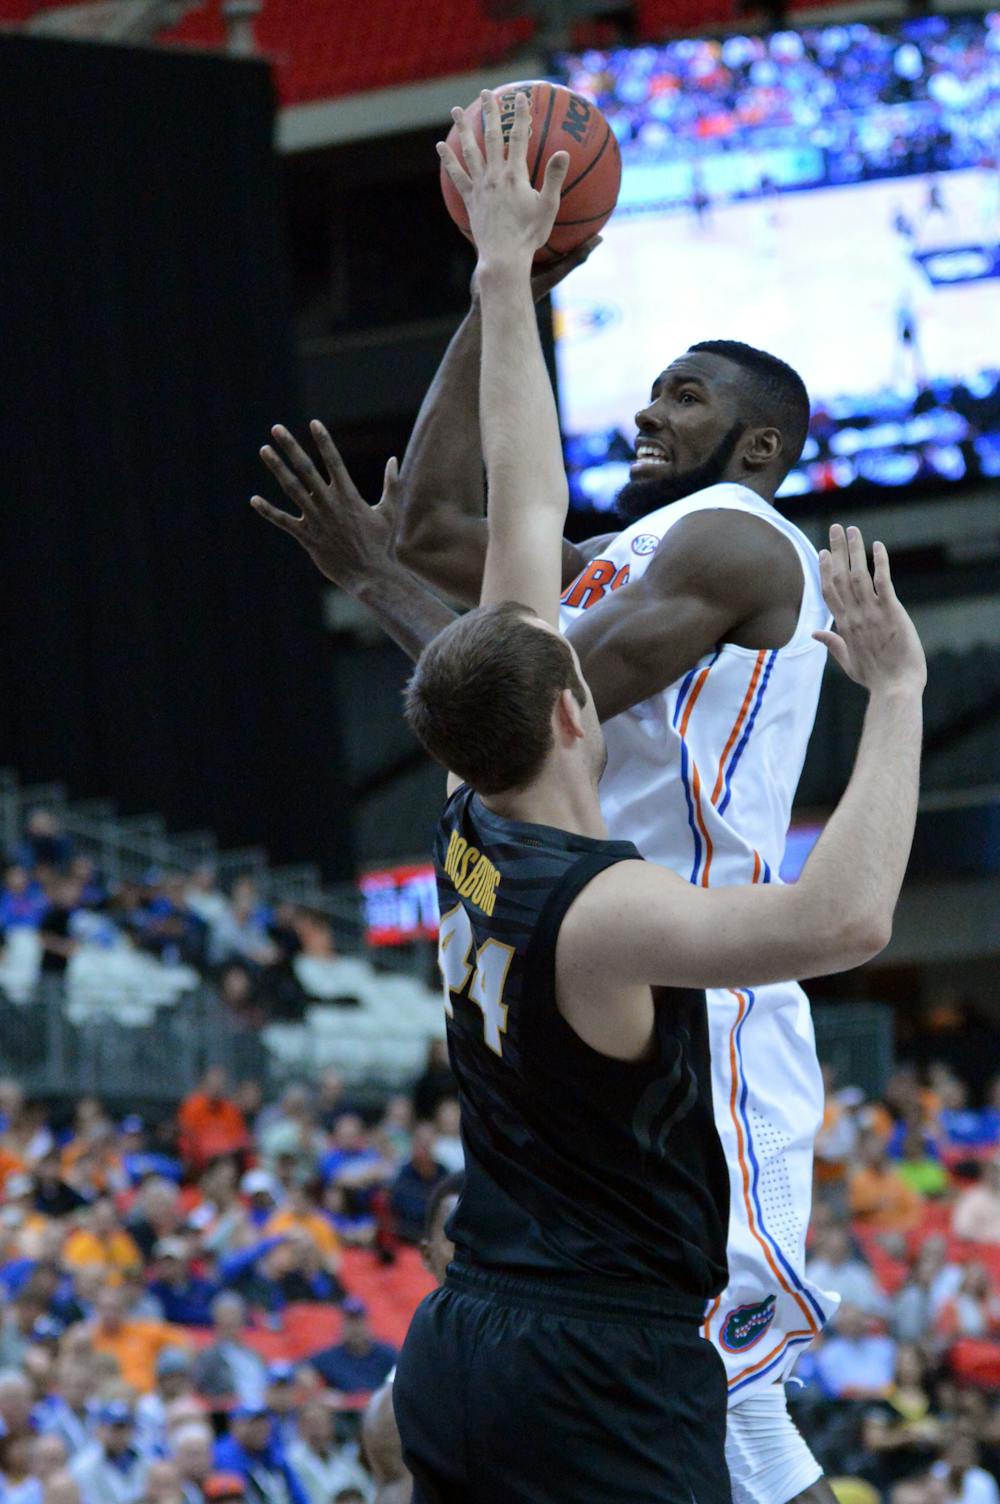 <p>Patric Young attempts a shot during Florida’s 72-49 win against Missouri on March 14 in the Georgia Dome in Atlanta during the Southeastern Conference Tournament. Young was the 2014 SEC Defensive Player of the Year and averaged 6.4 rebounds per game on the season.</p>